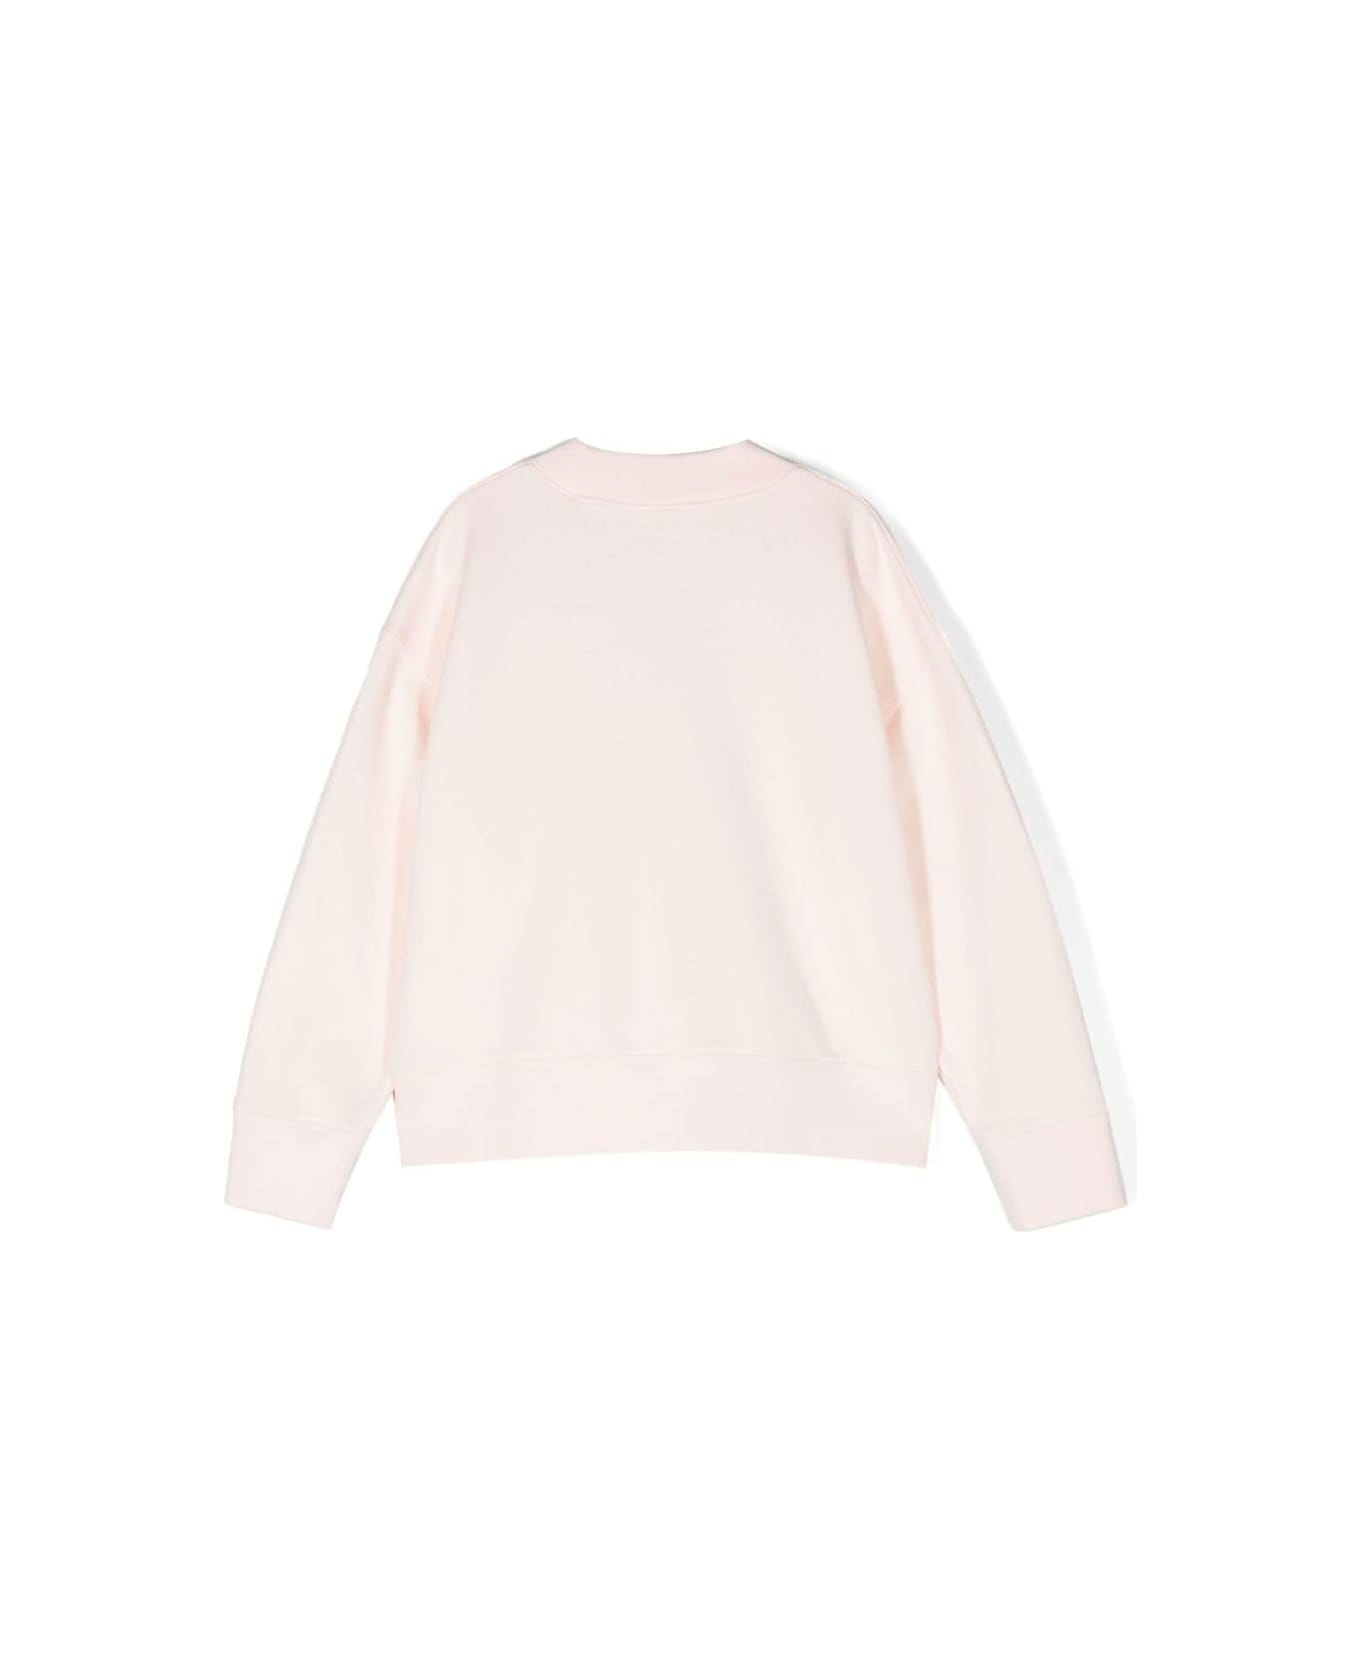 Palm Angels Crewneck Sweatshirt With Graphic Print In Pink Cotton Girl - Pink